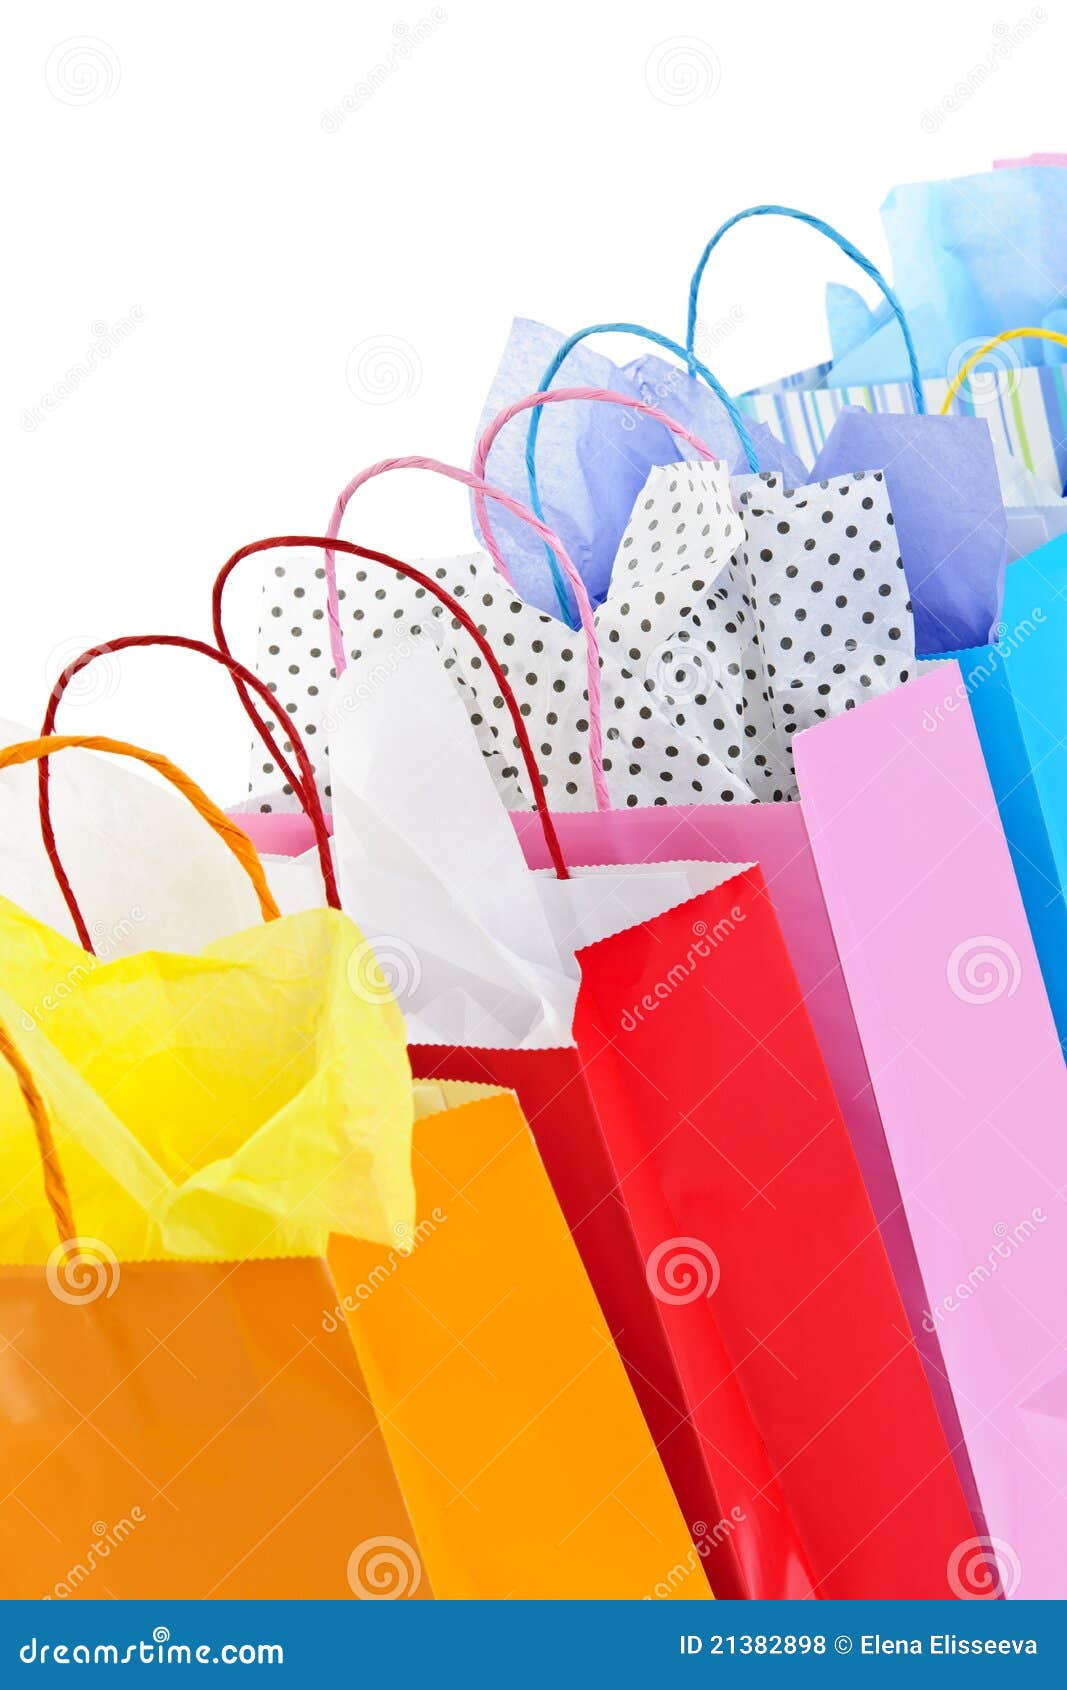 12,748 Luxury Bag Display Images, Stock Photos, 3D objects, & Vectors